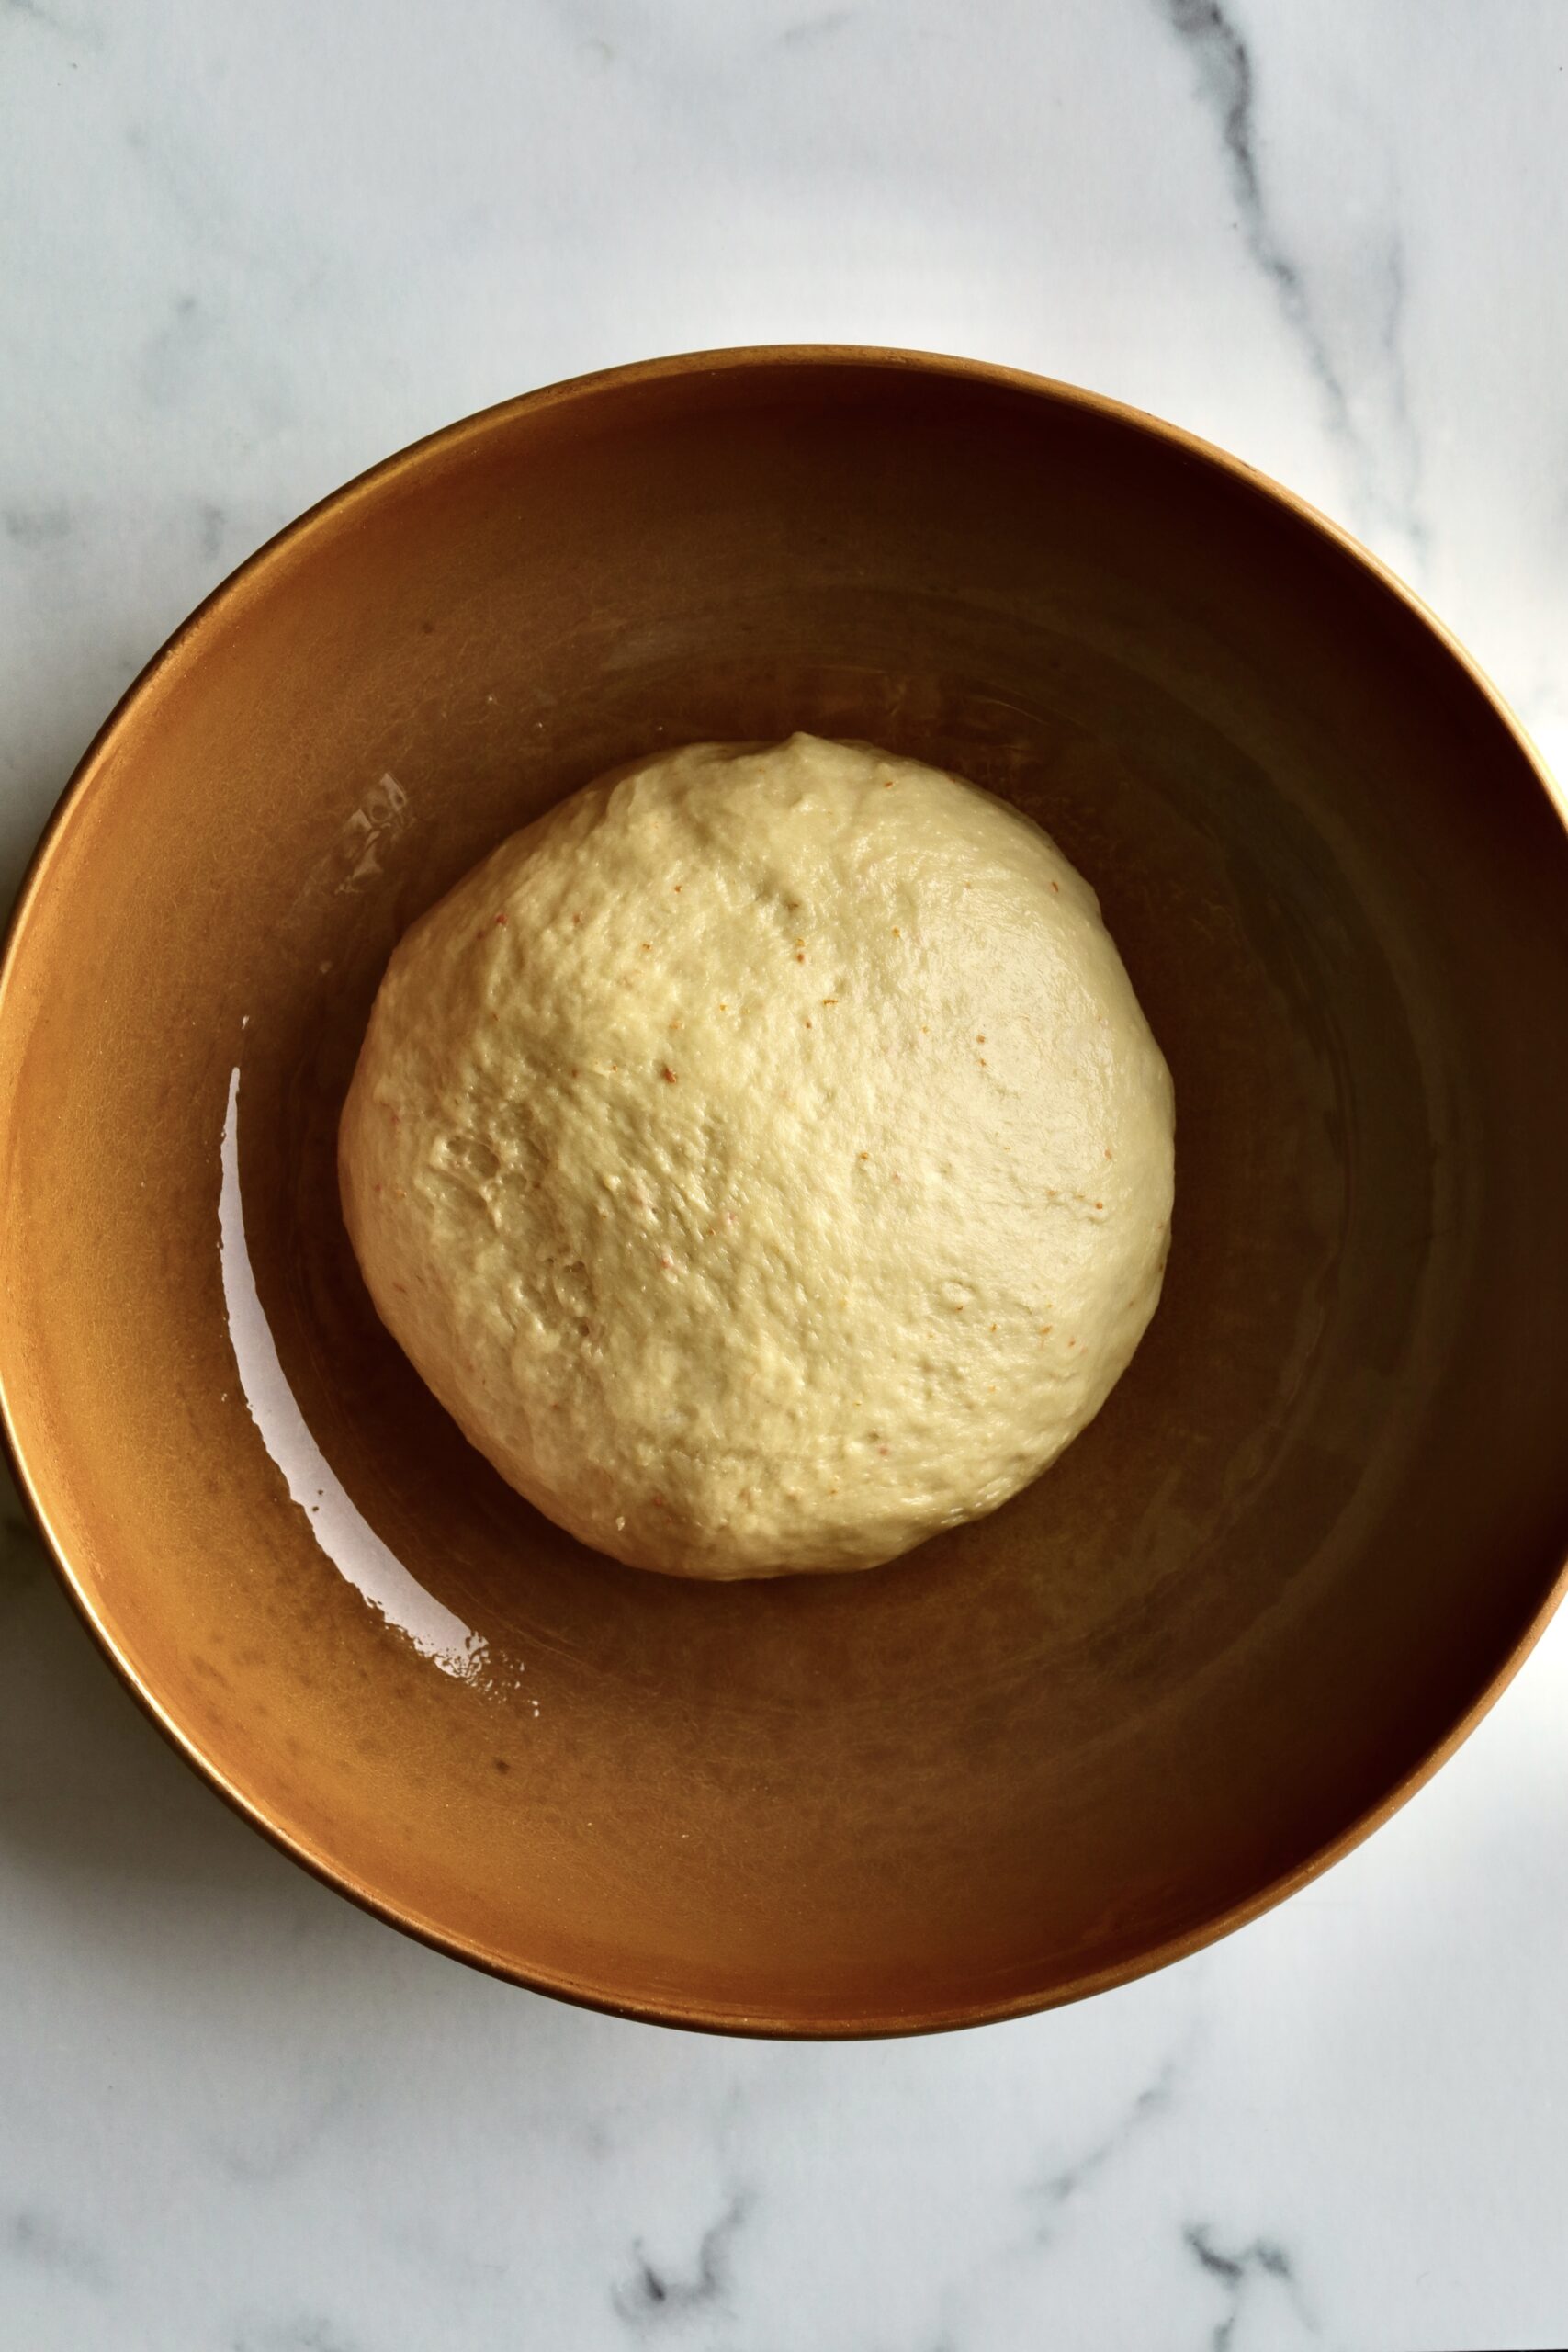 Process of making Bomboloni (how to make bomboloni recipe)- dough in greased bowl ready for first rise.